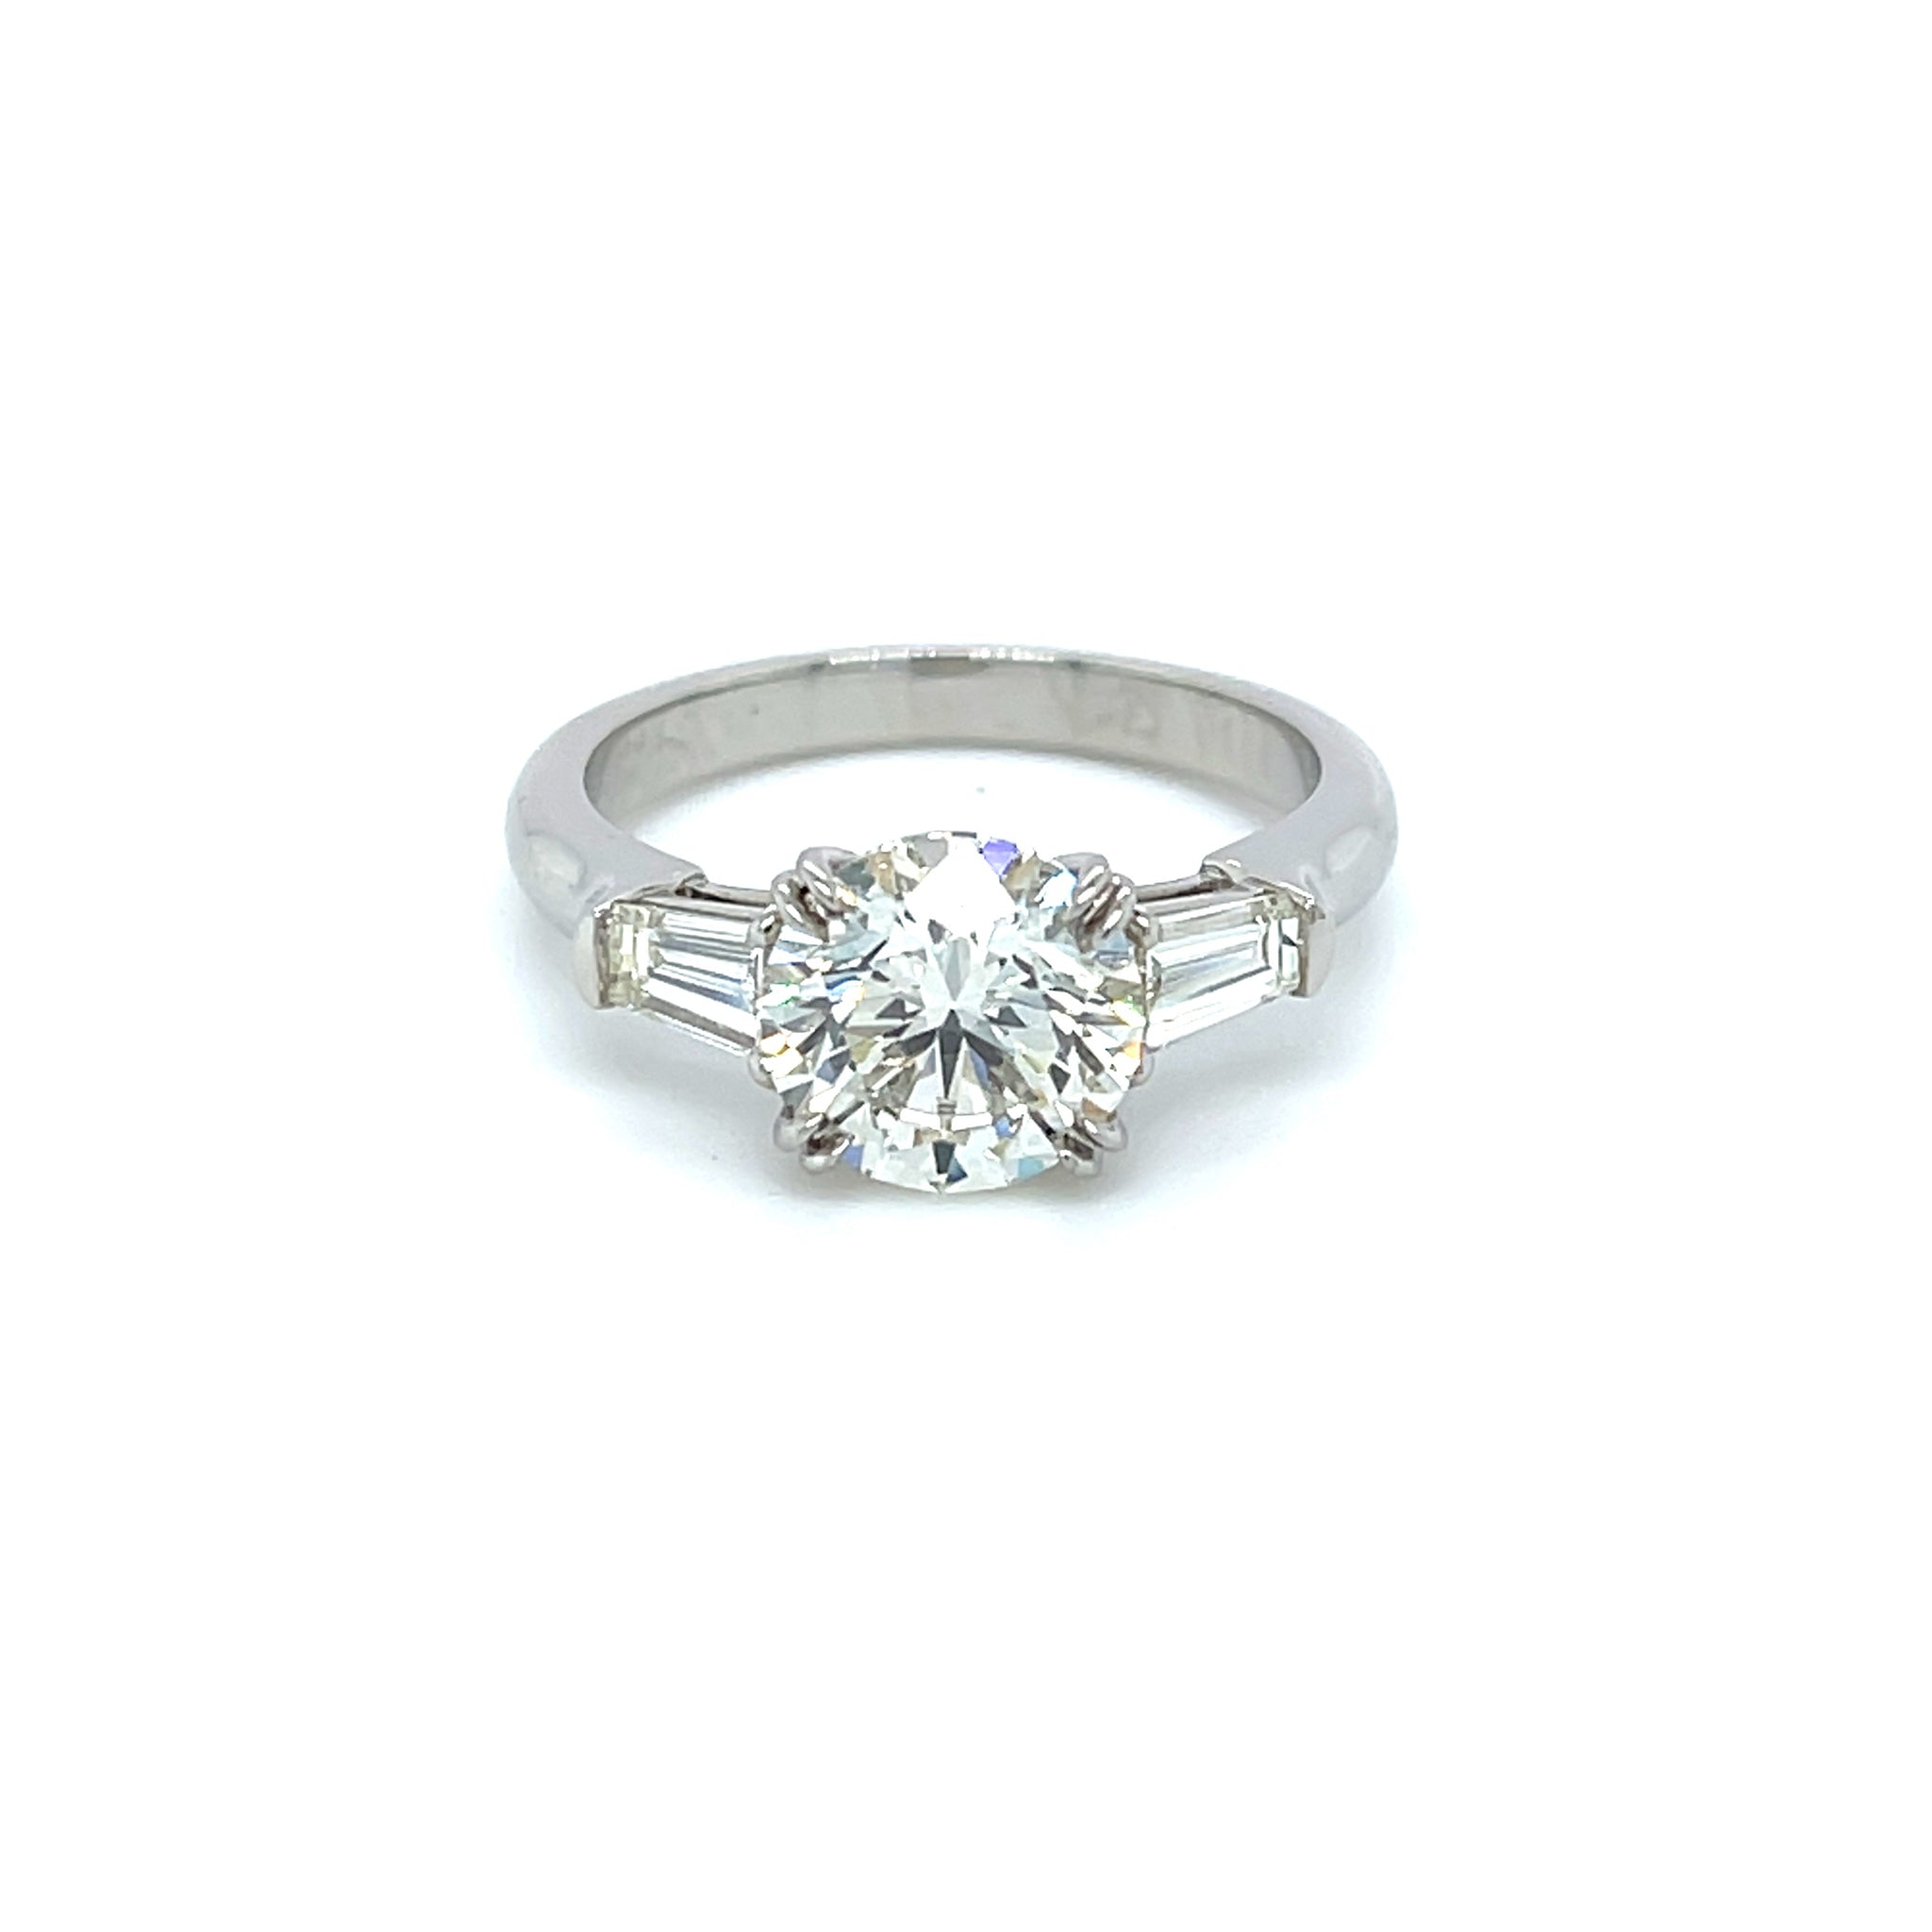 14k White Gold 2.15ct Round Diamond Engagement Ring with Tapered Baguettes